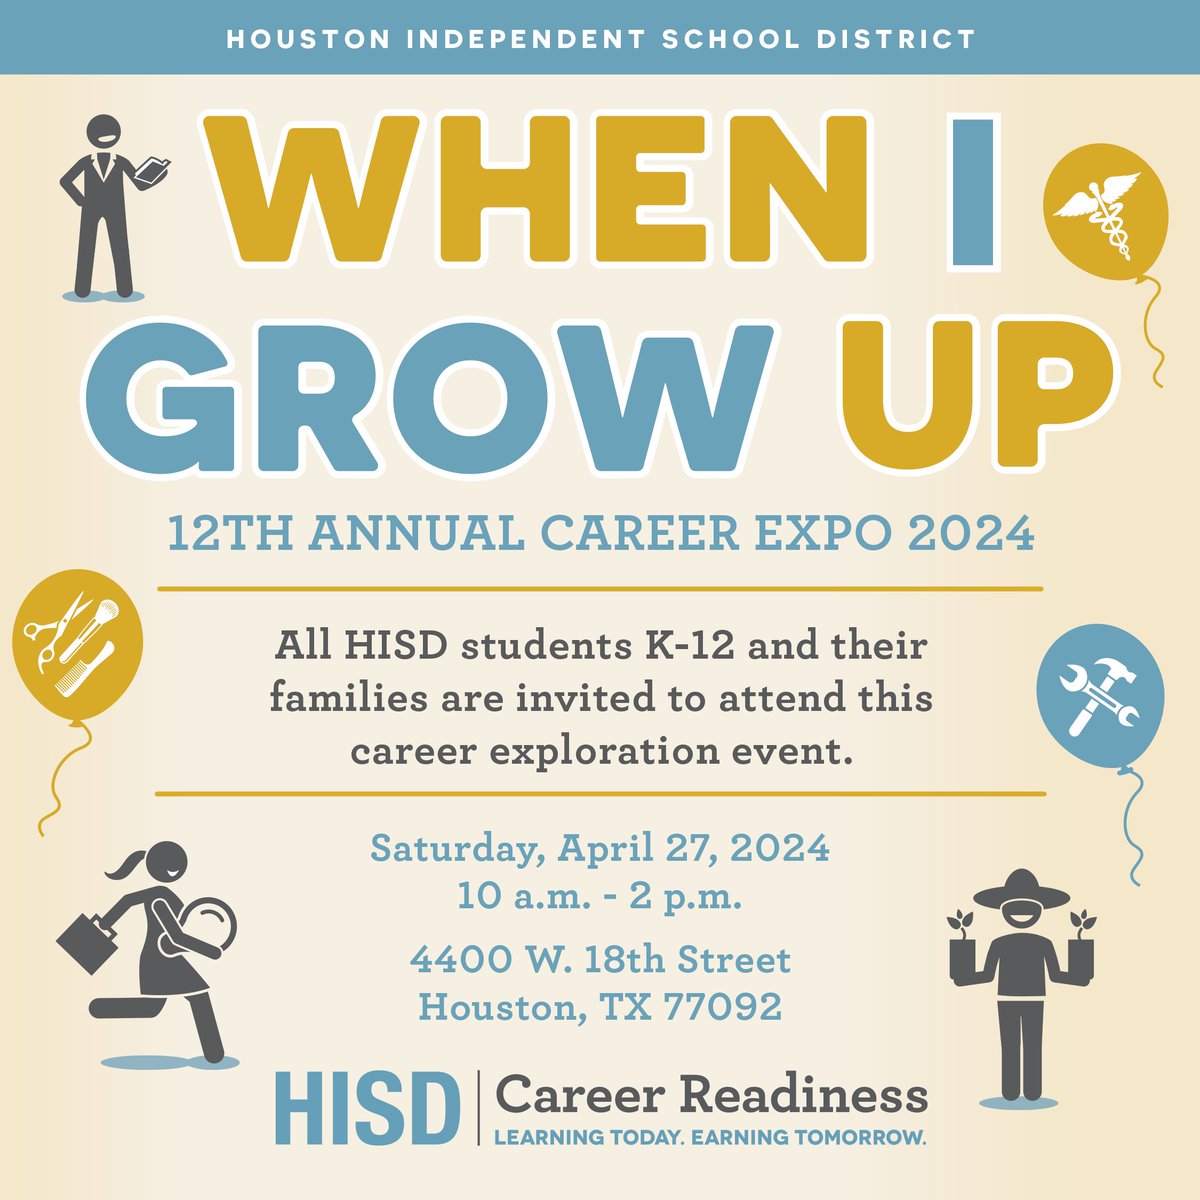 Students and families, join us for our 12th annual When I Grow Up career expo on 4/27. Explore career options in high-demand, high-growth industries and enjoy hands-on displays, stimulating exhibits, and activities to engage and motivate students. More: bit.ly/3VOpZ0P